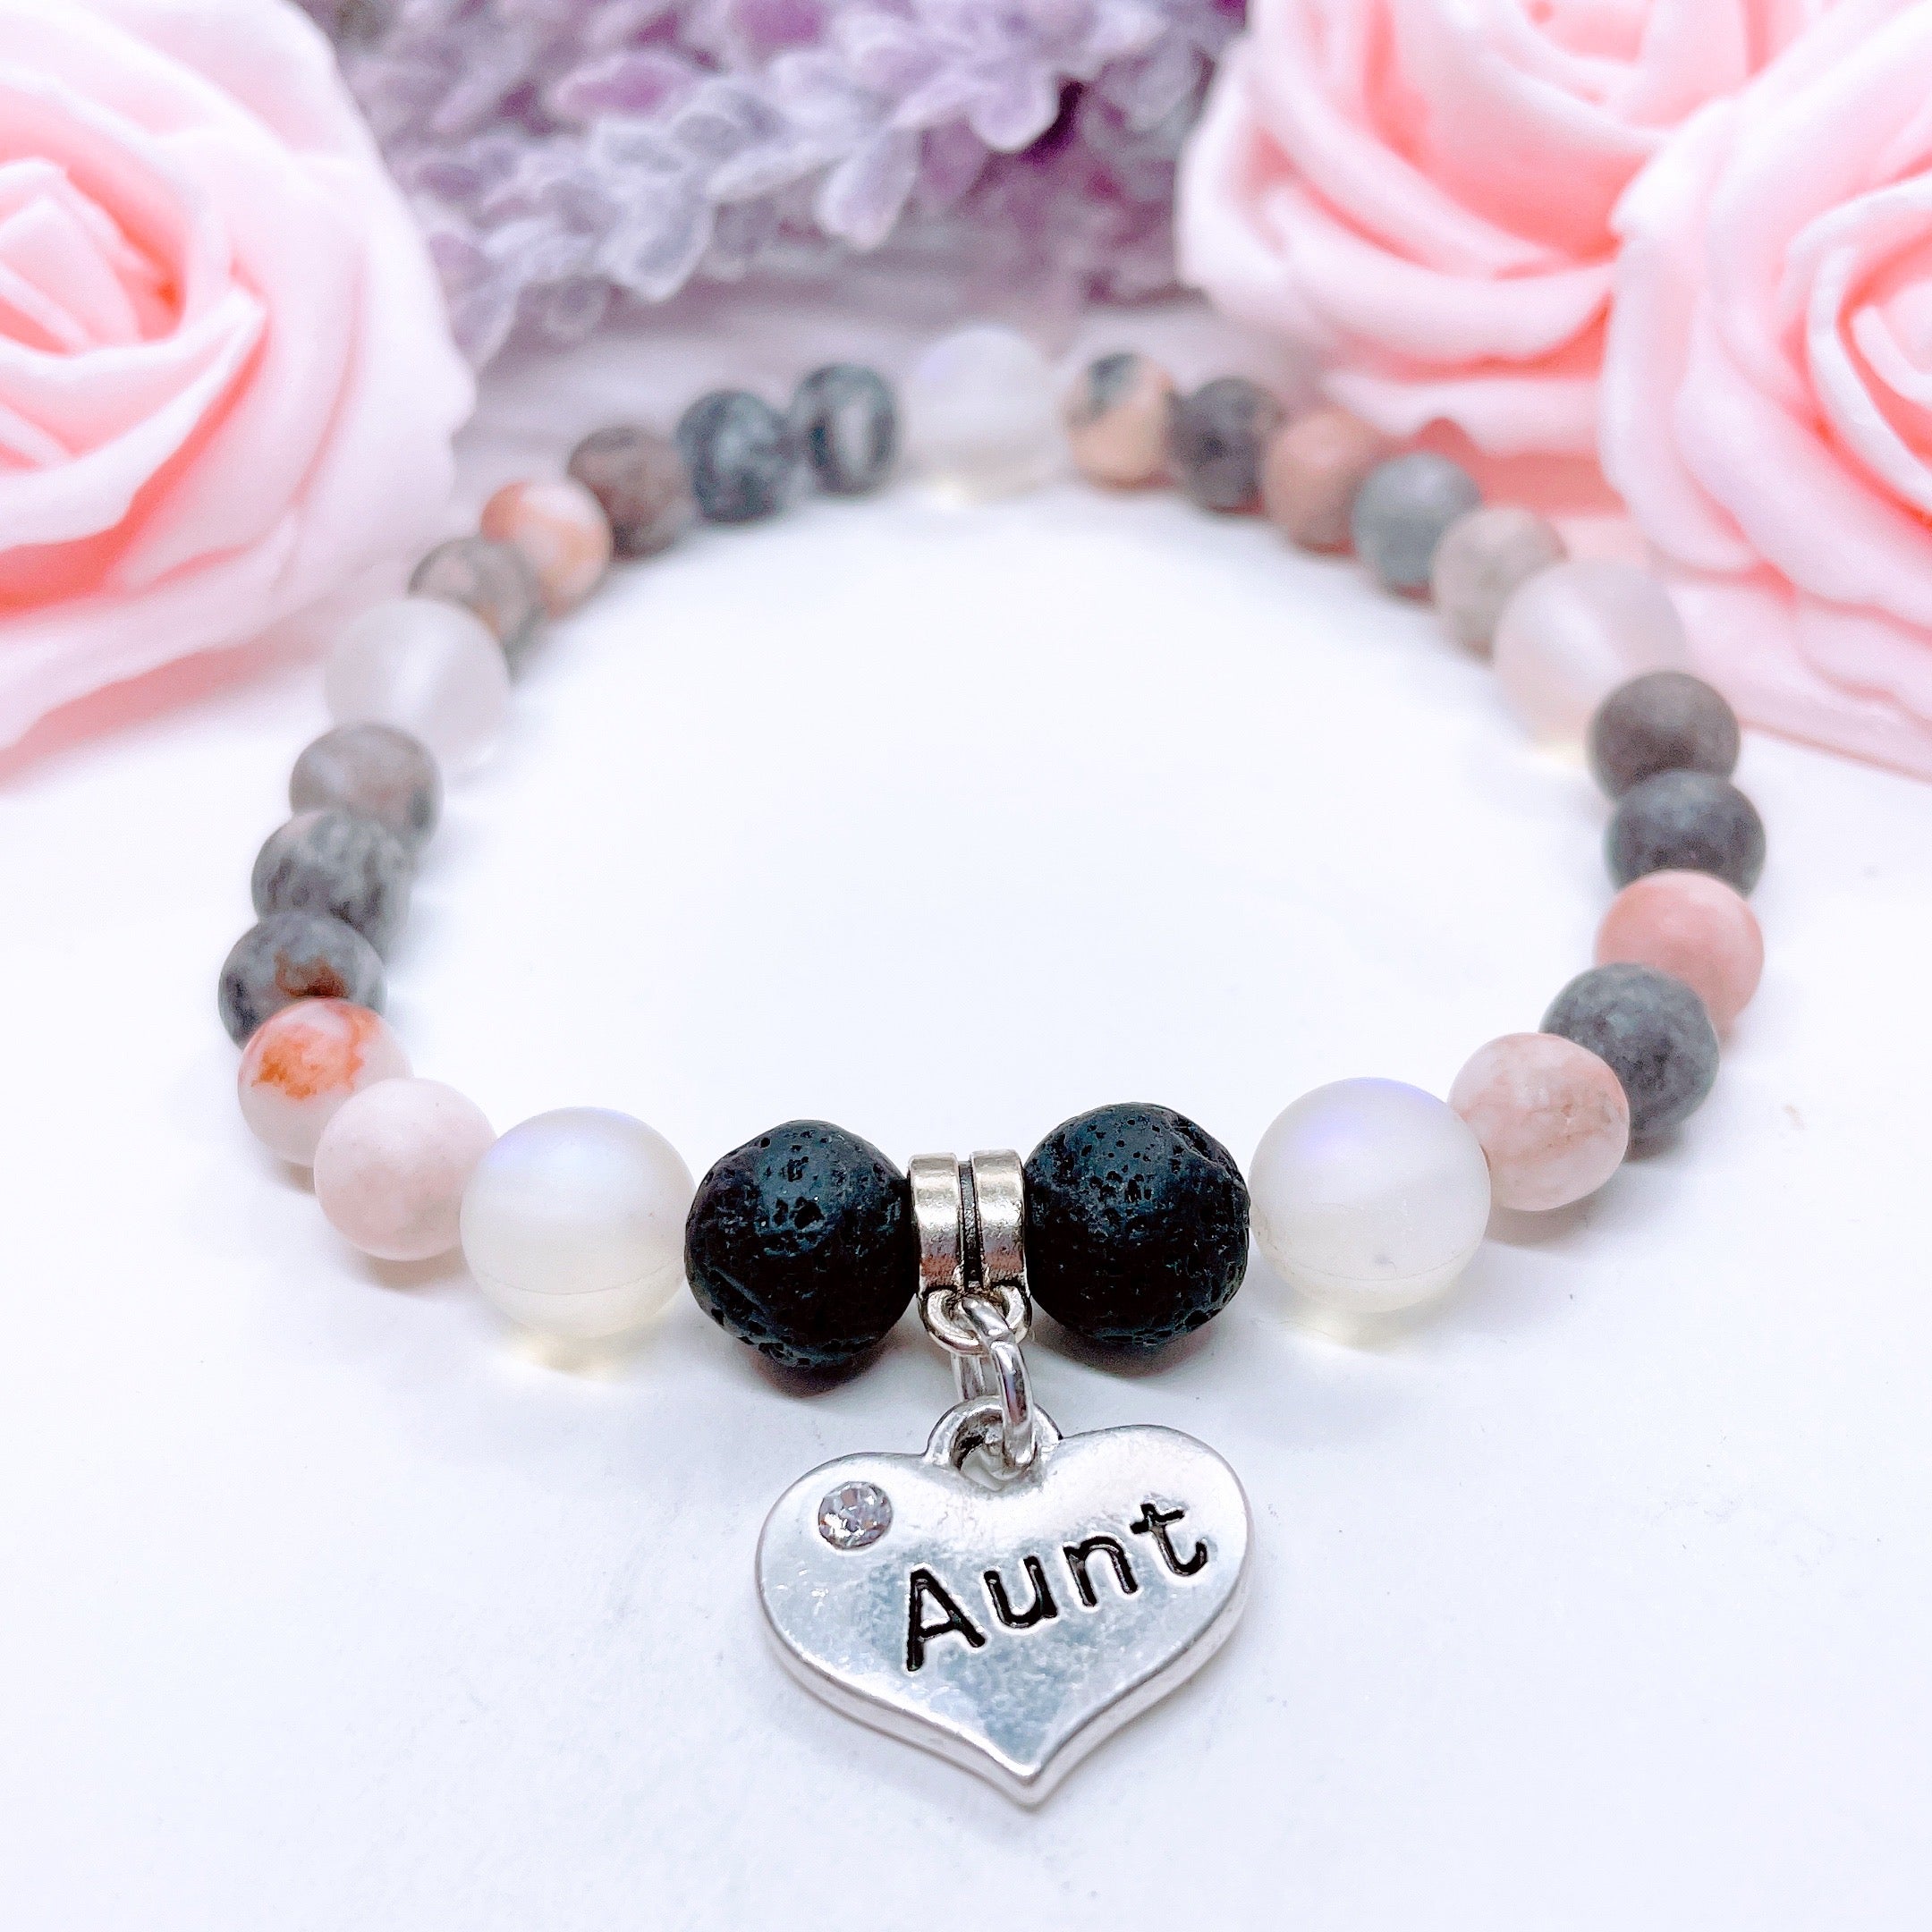 Birthday Gift for Niece, Aunt to Niece Gift, Personalized Gift for Her,  Custom Jewelry, Birthstone Bracelet, Heart Charm Bracelet For Girl